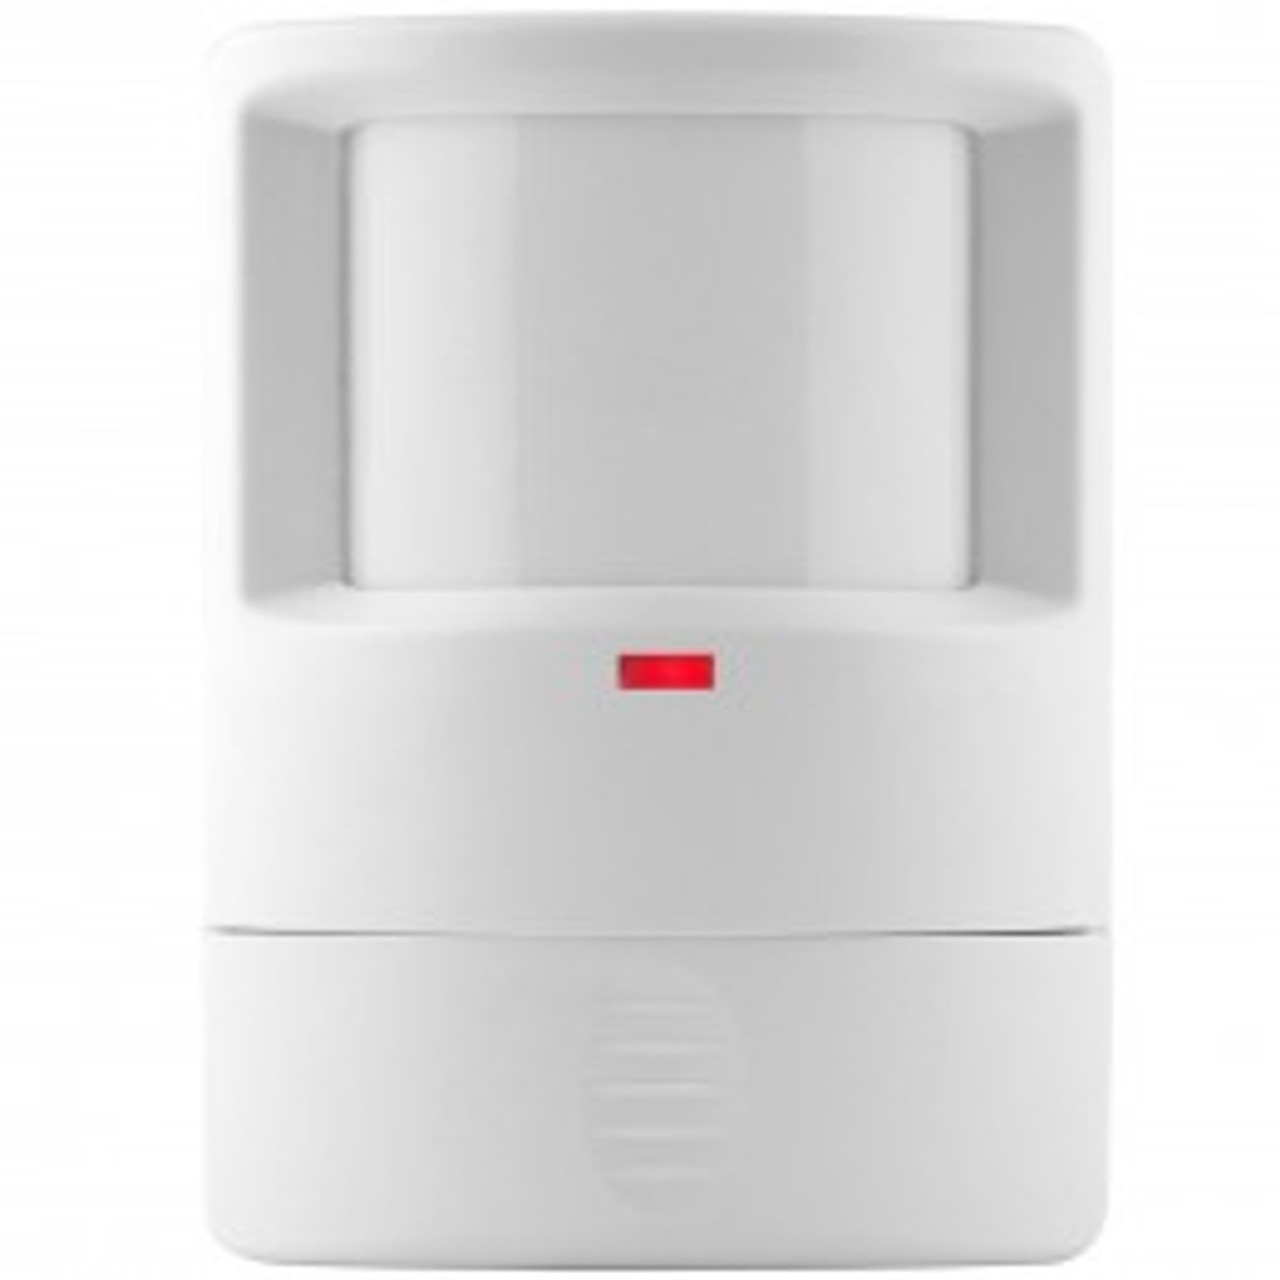 The MPW-V 150° passive infrared (PIR) occupancy sensors turn lighting systems onand off based on occupancy and ambient light levels. The light level feature keeps lights from turning on if the ambient light level is sufficient. The sensors can be configured to turn lighting on, and hold it on as long as the sensor detects occupancy. After no movement is detected for a specified time the lights are switched off.